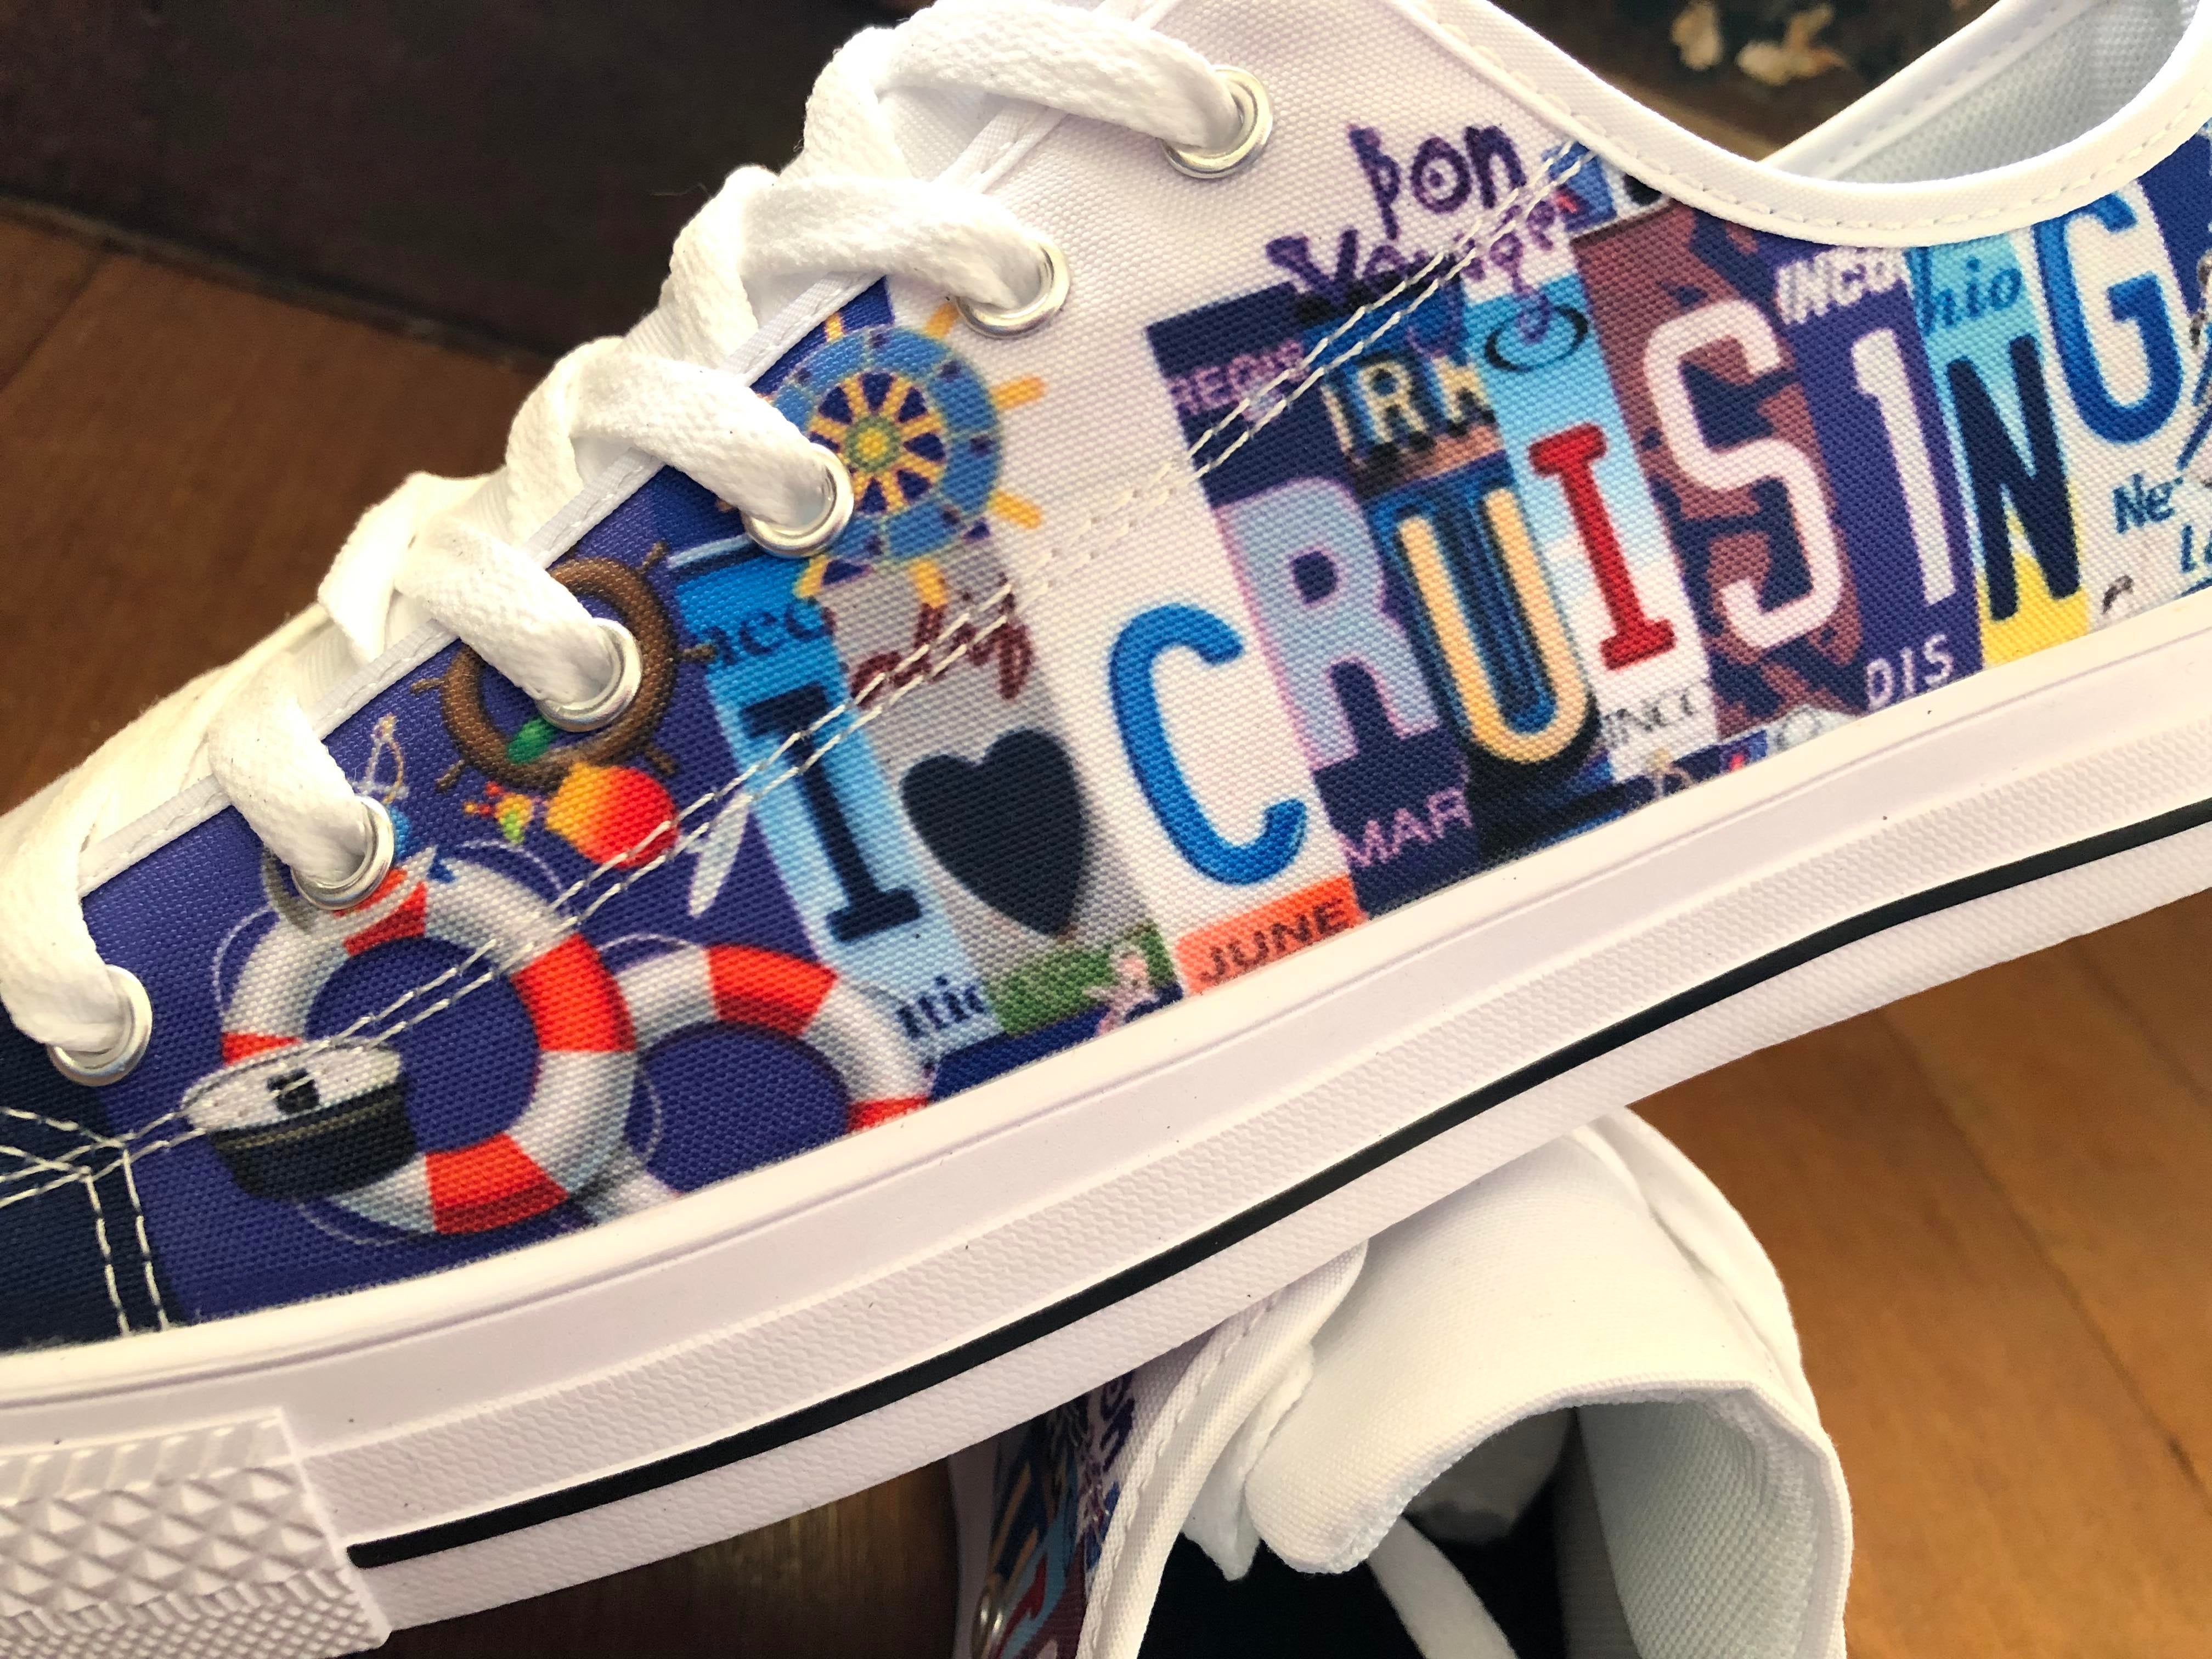 Cruise - Low Top Shoes